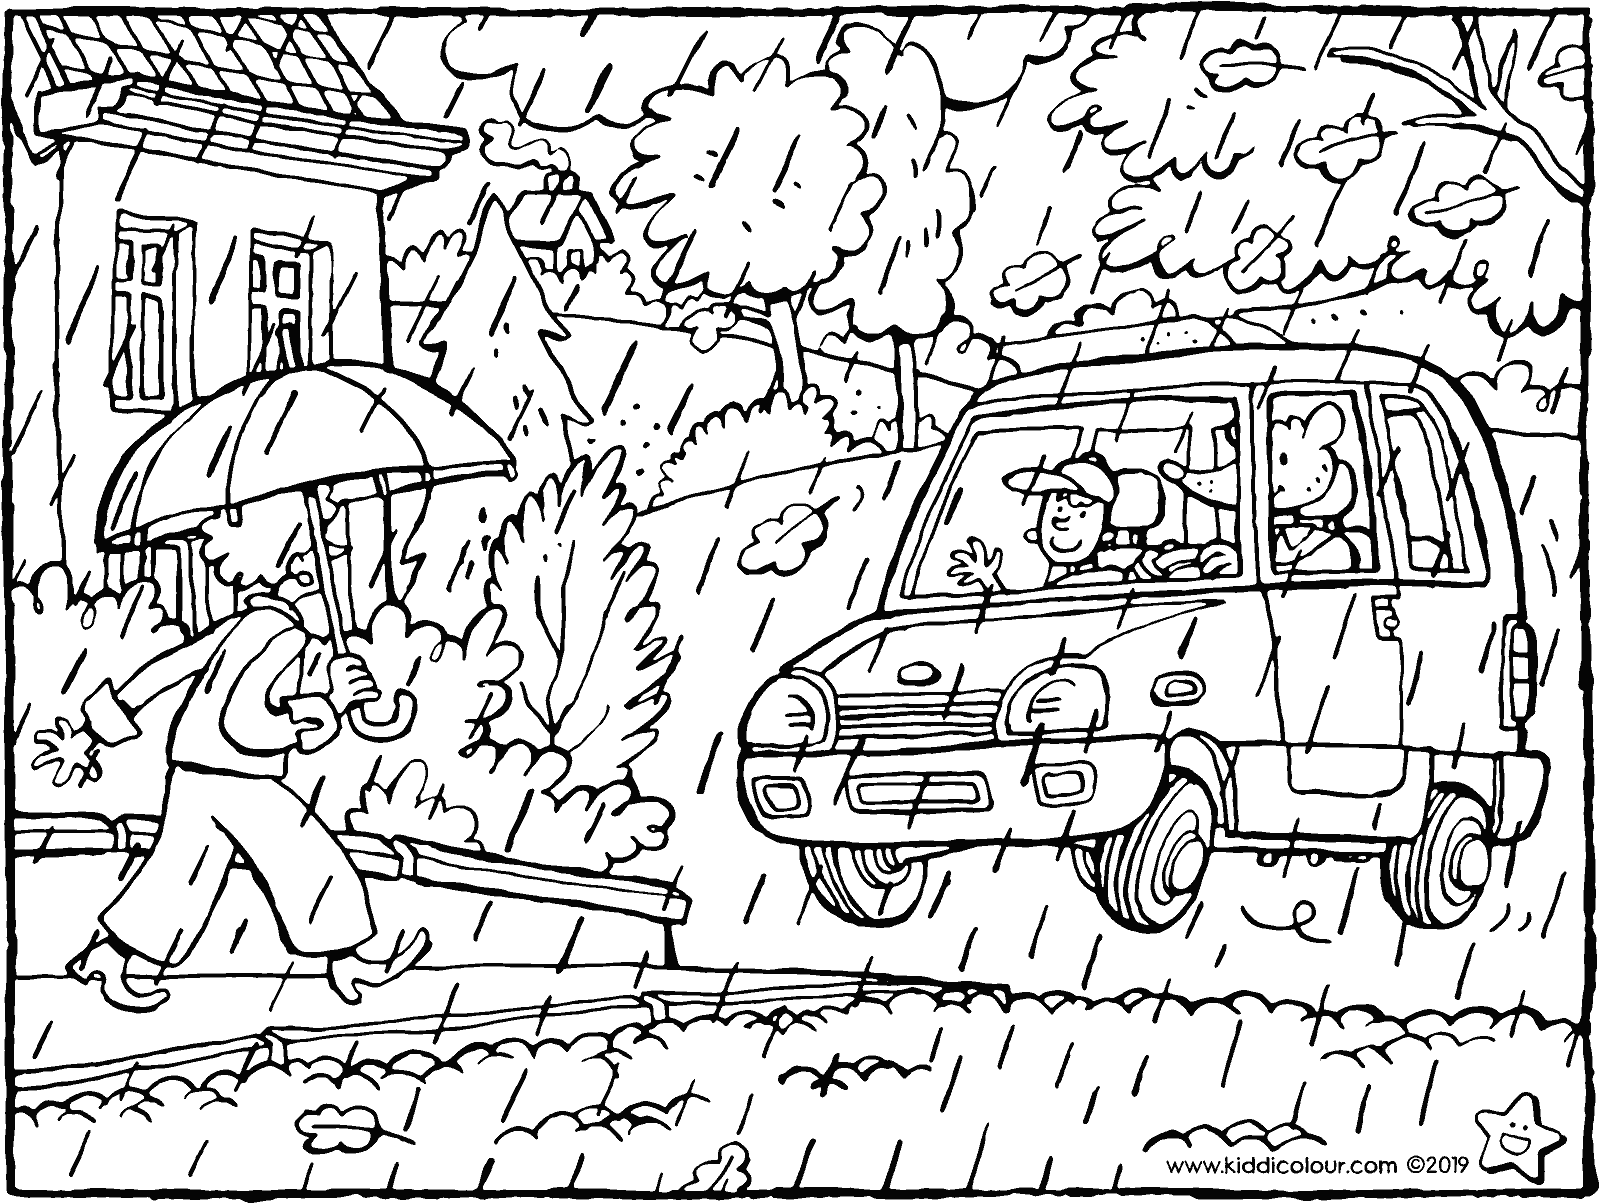 rainy day coloring pages for adults | rainy day list | rainy days or rainy day